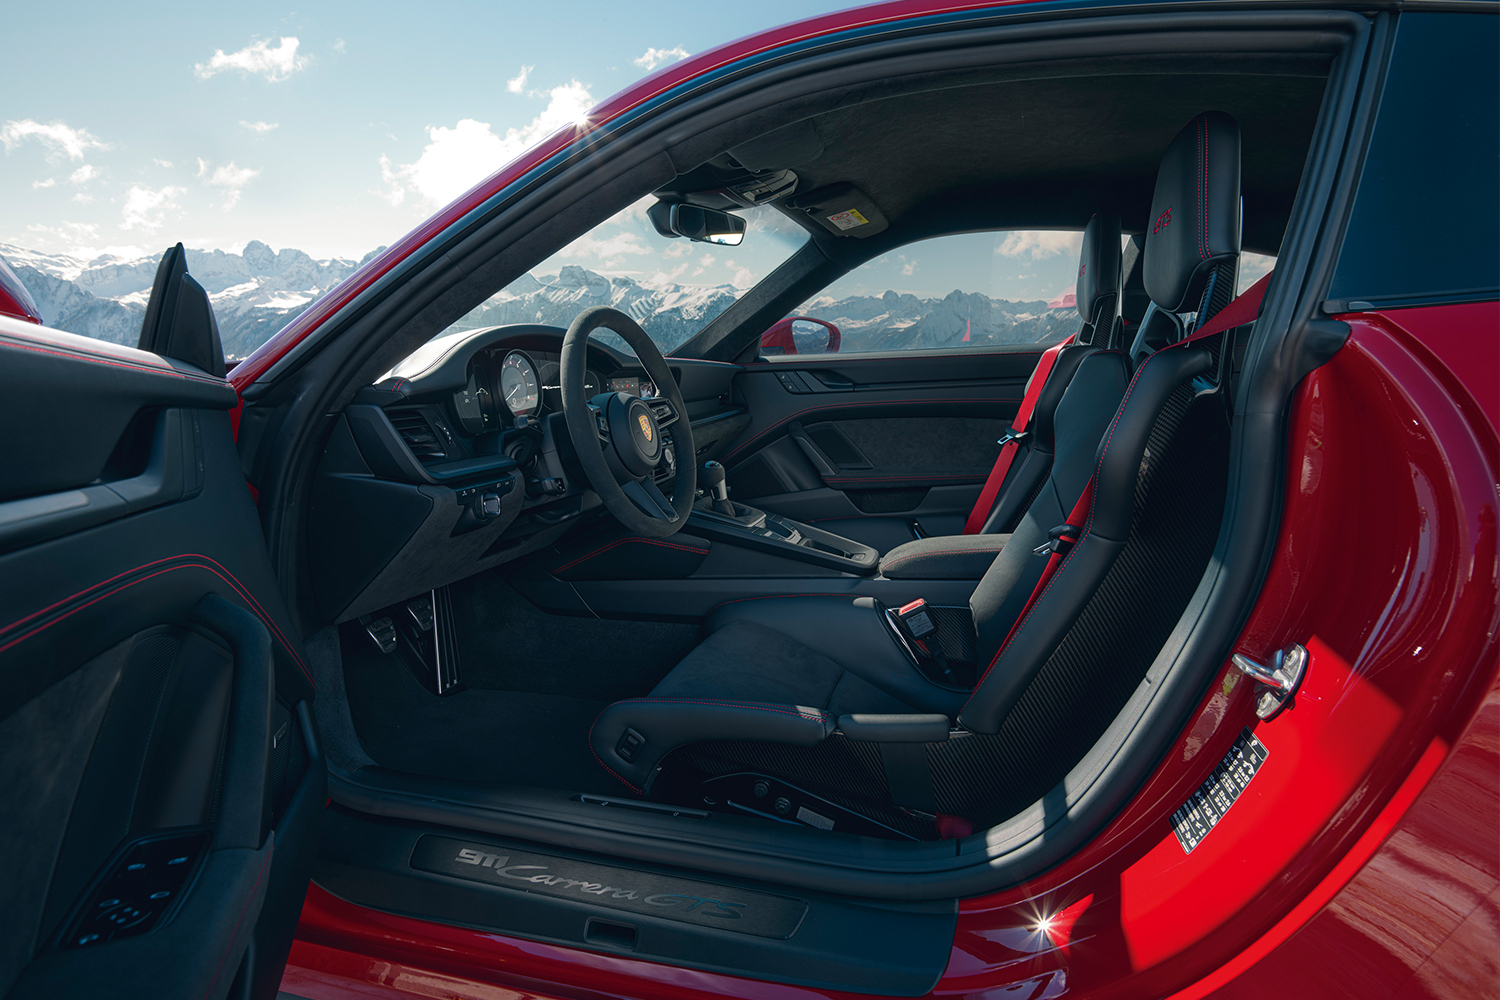 The front two seats of a 2022 Porsche 911 Carrera 4 GTS as seen from the open door of the driver's side